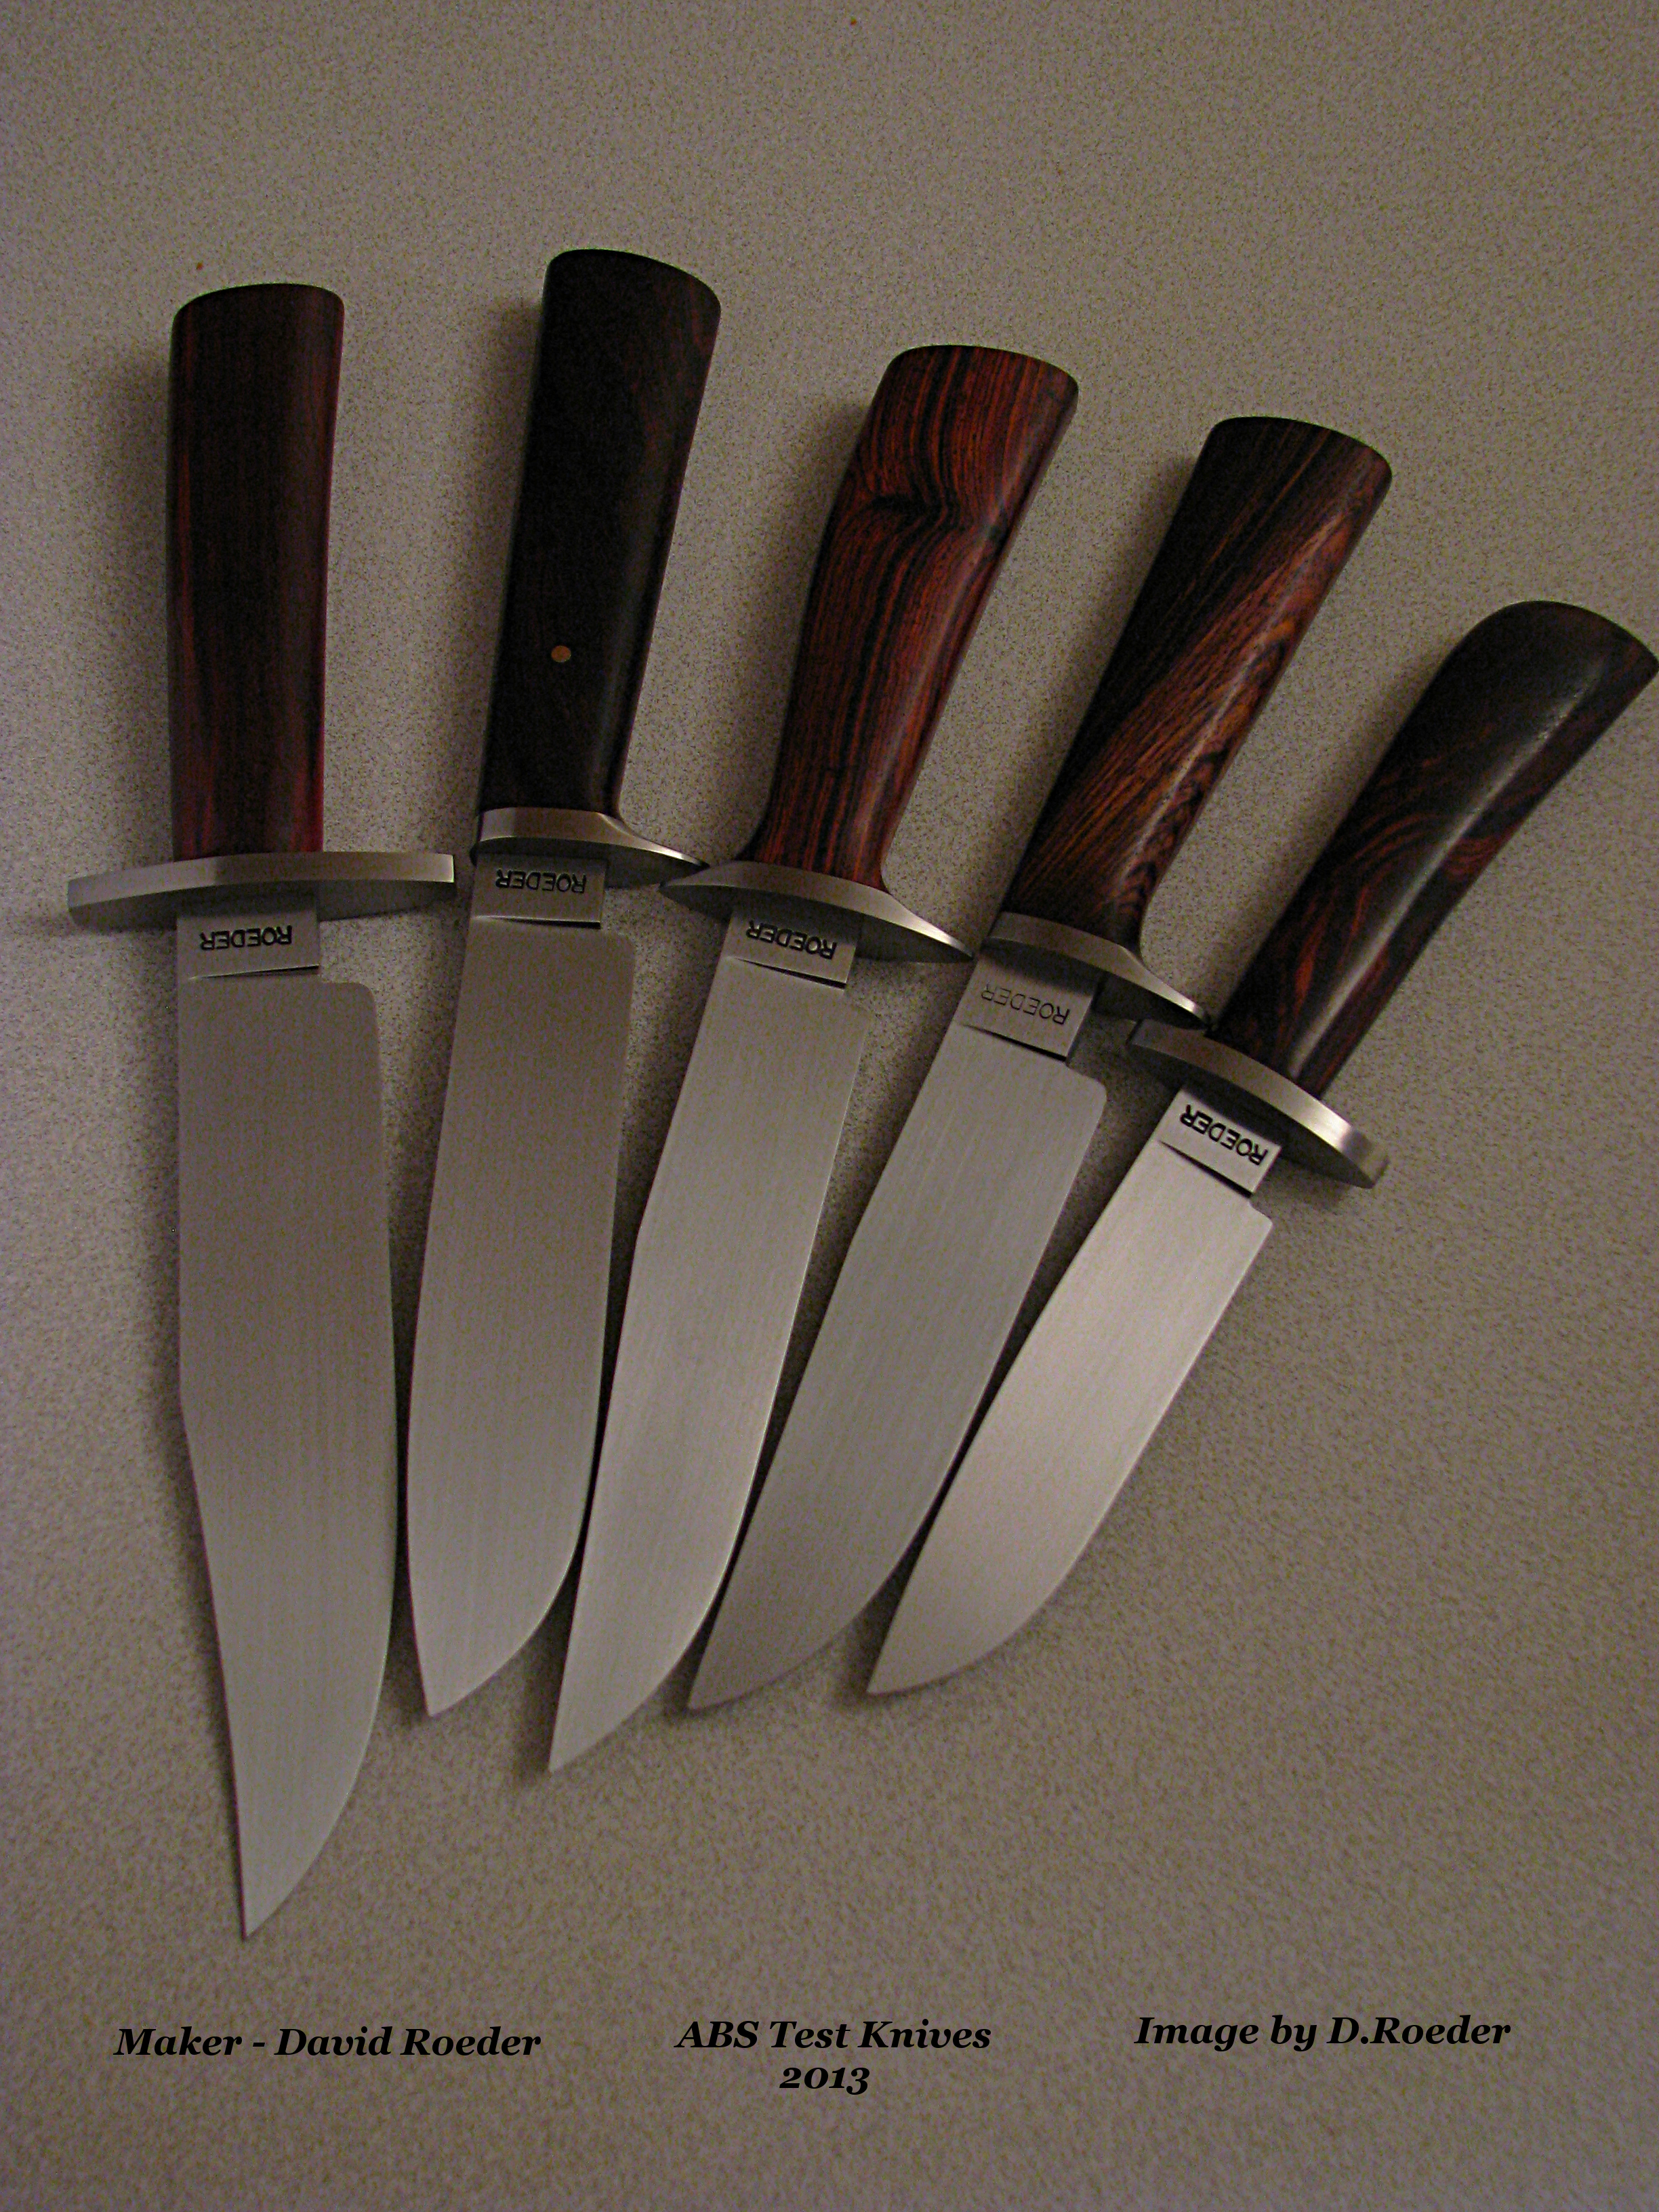 ABS JS Test Knives by David Roeder